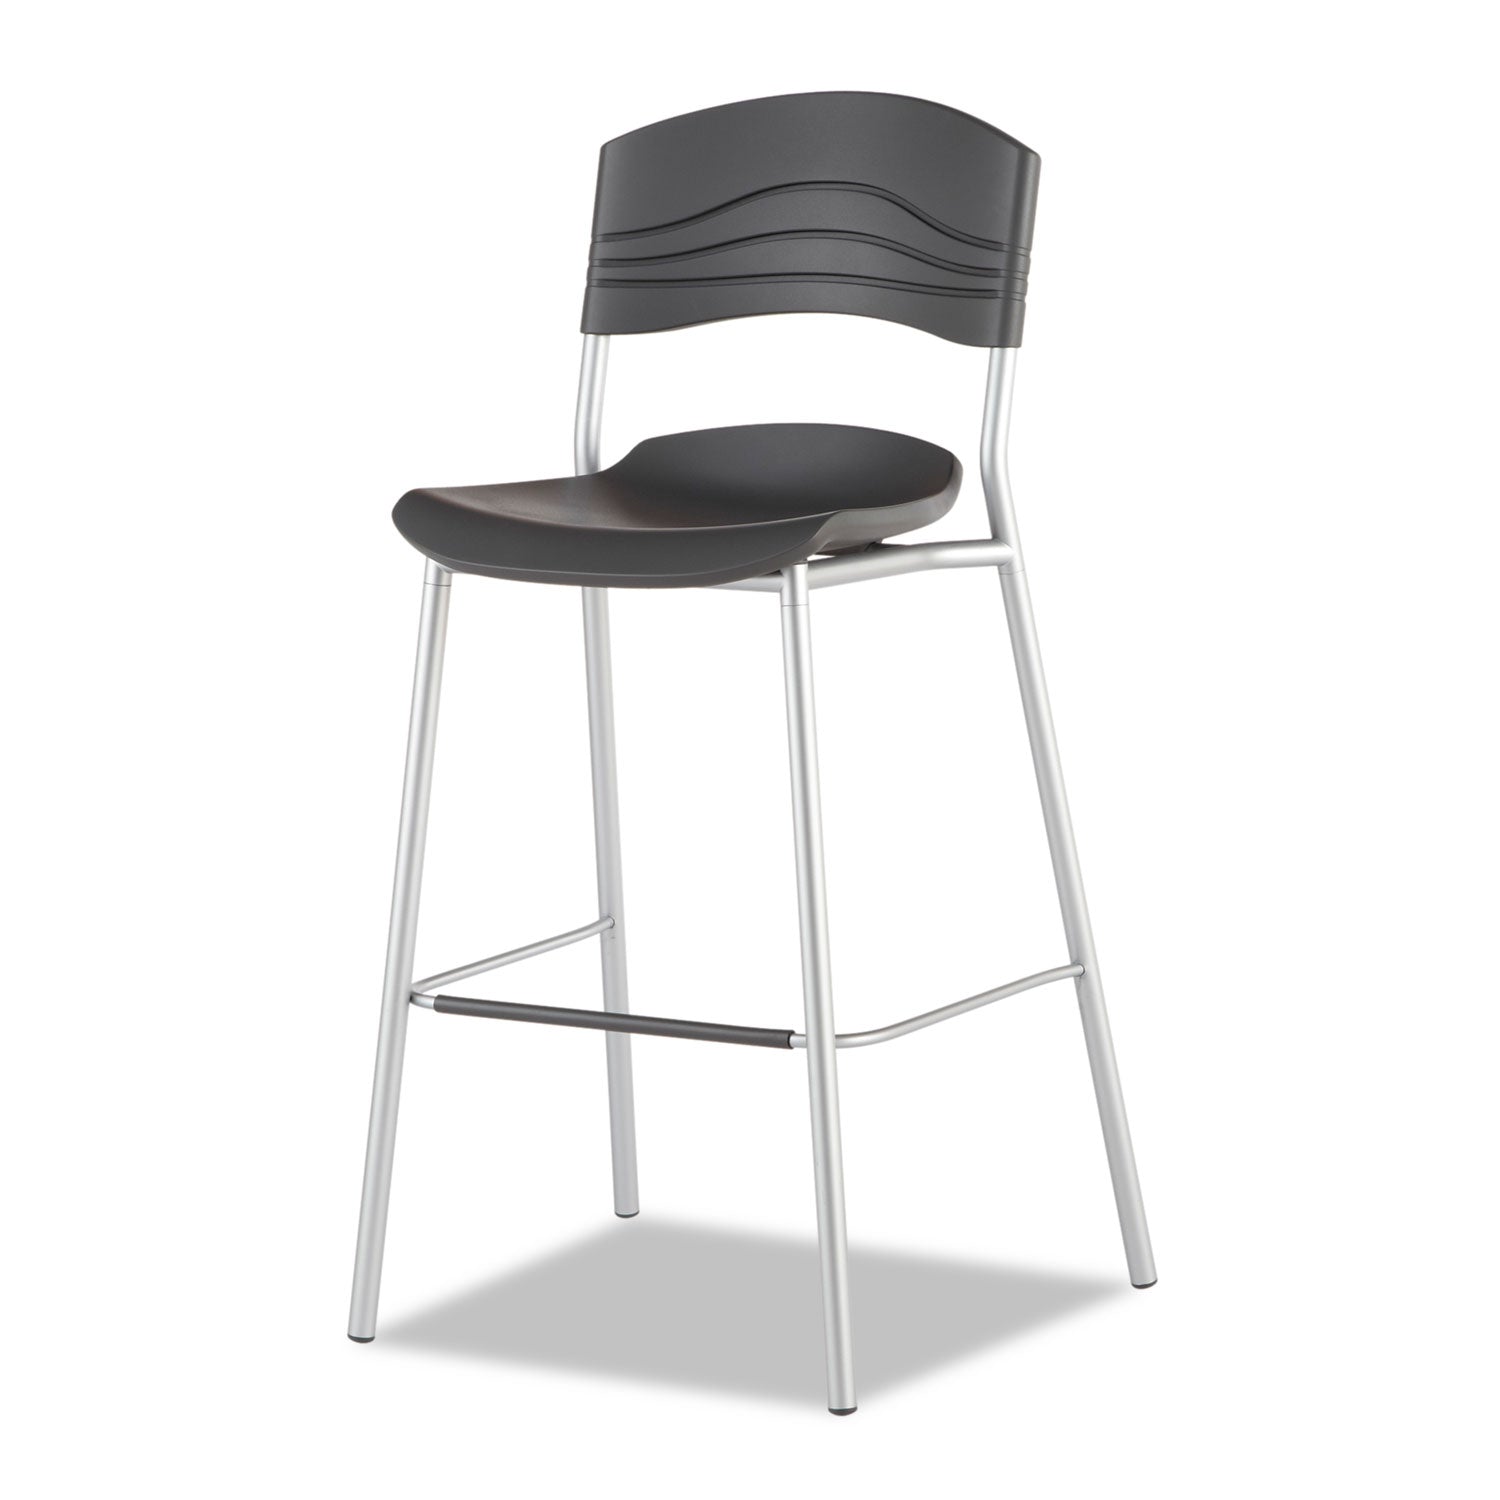 CafeWorks Stool, Supports Up to 225 lb, 30" Seat Height, Graphite Seat, Graphite Back, Silver Base - 